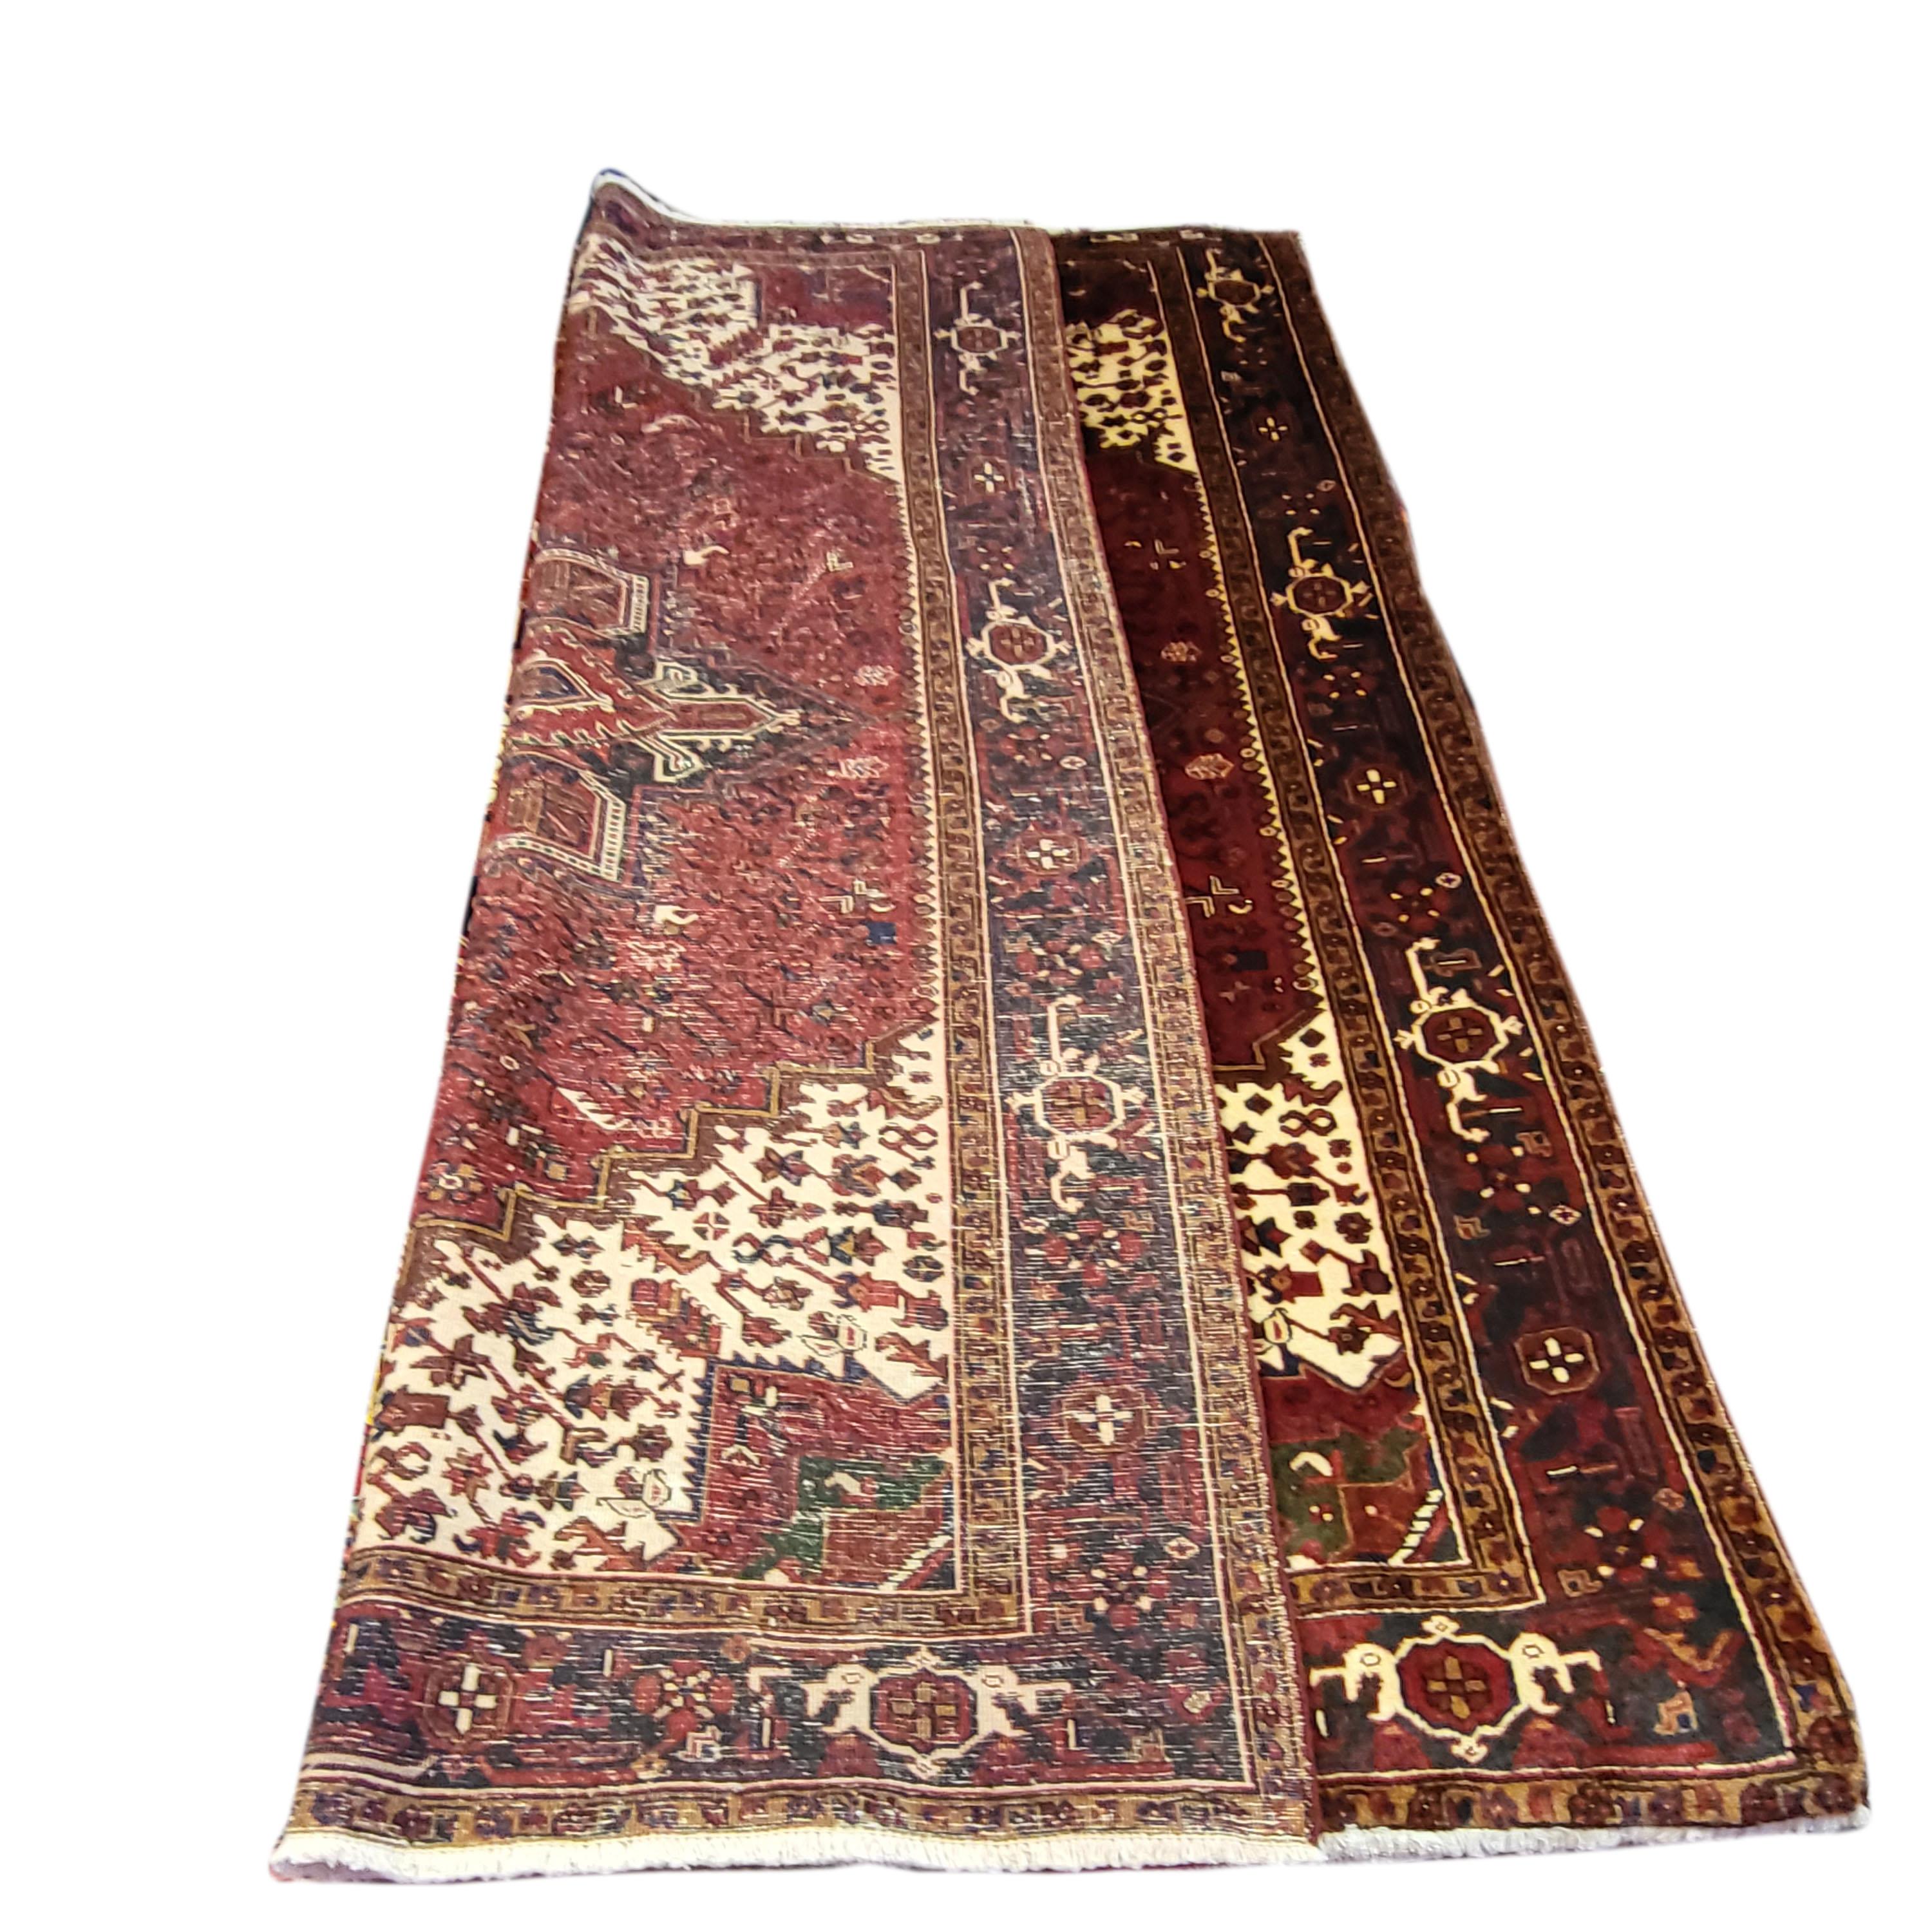 Gorgeous 8' x 11' authentic, vintage Persian Heriz. This is no Indian reproduction, but a fine example of the worlds most popular Persian Rug. Featuring bold tribal inspired design woven with shimmering extra fine wool. The rich cream and maroon are